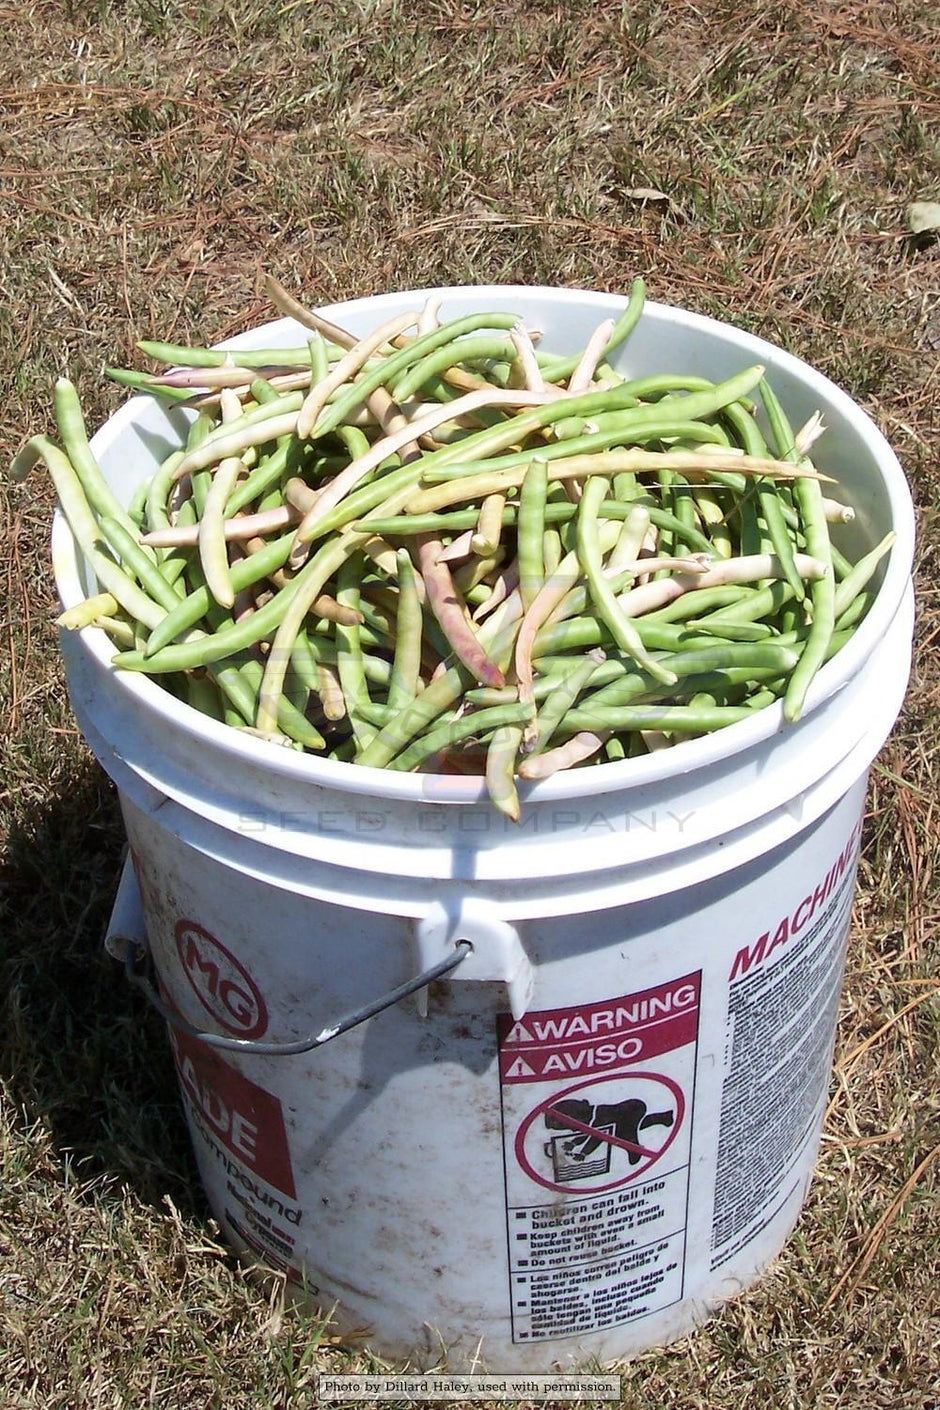 Heirloom Southern Peas or Cowpeas from the Victory Seed Company